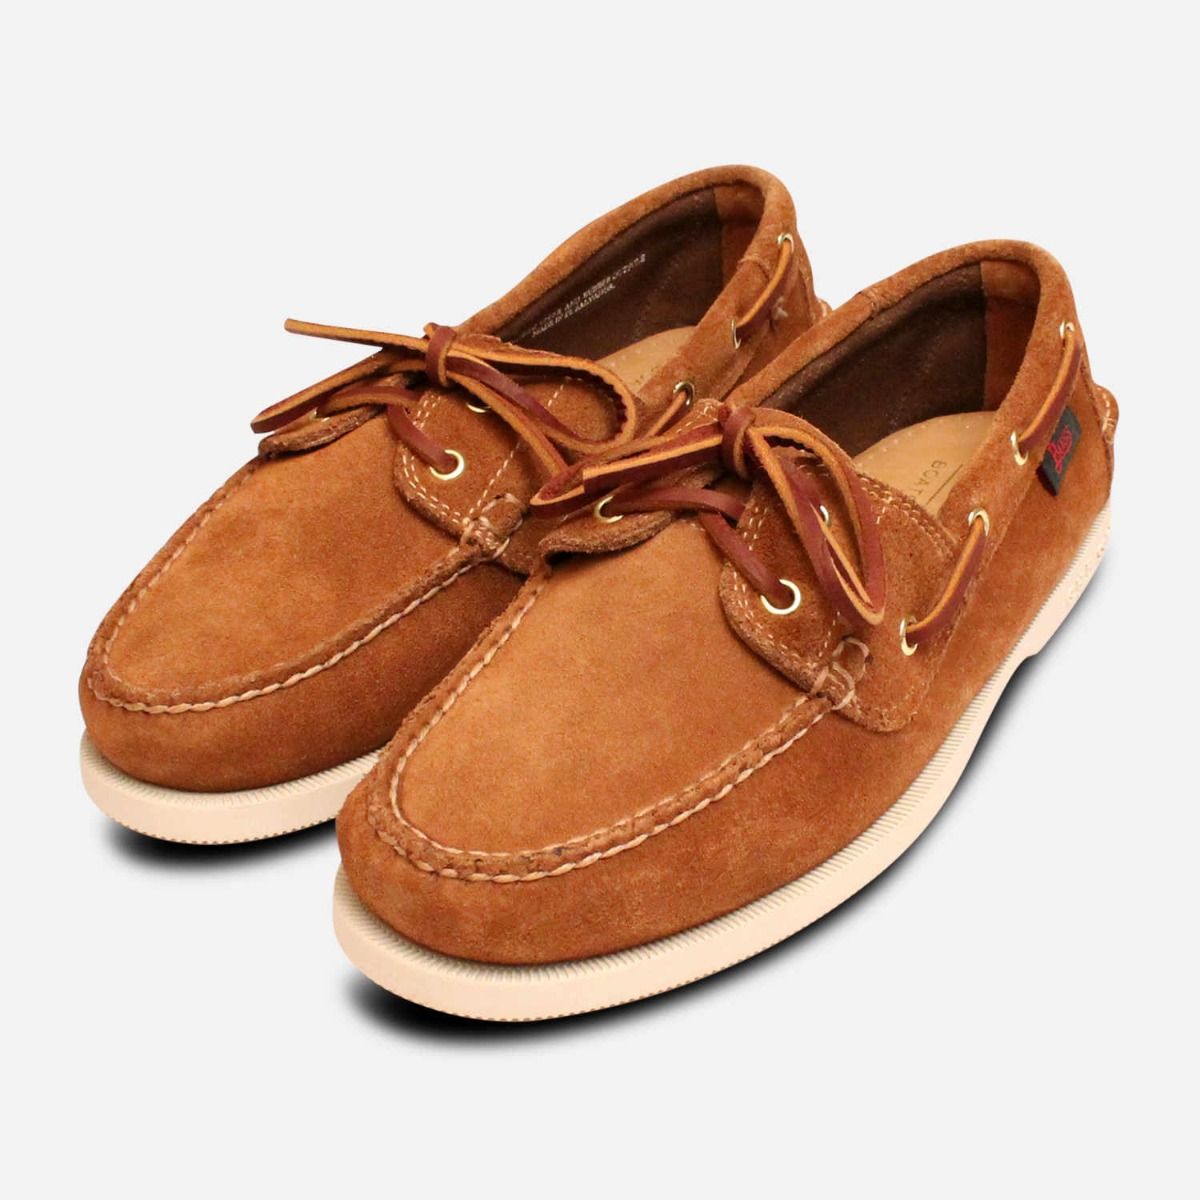 Luxury Light Brown Suede Bass Boat Shoes for Men